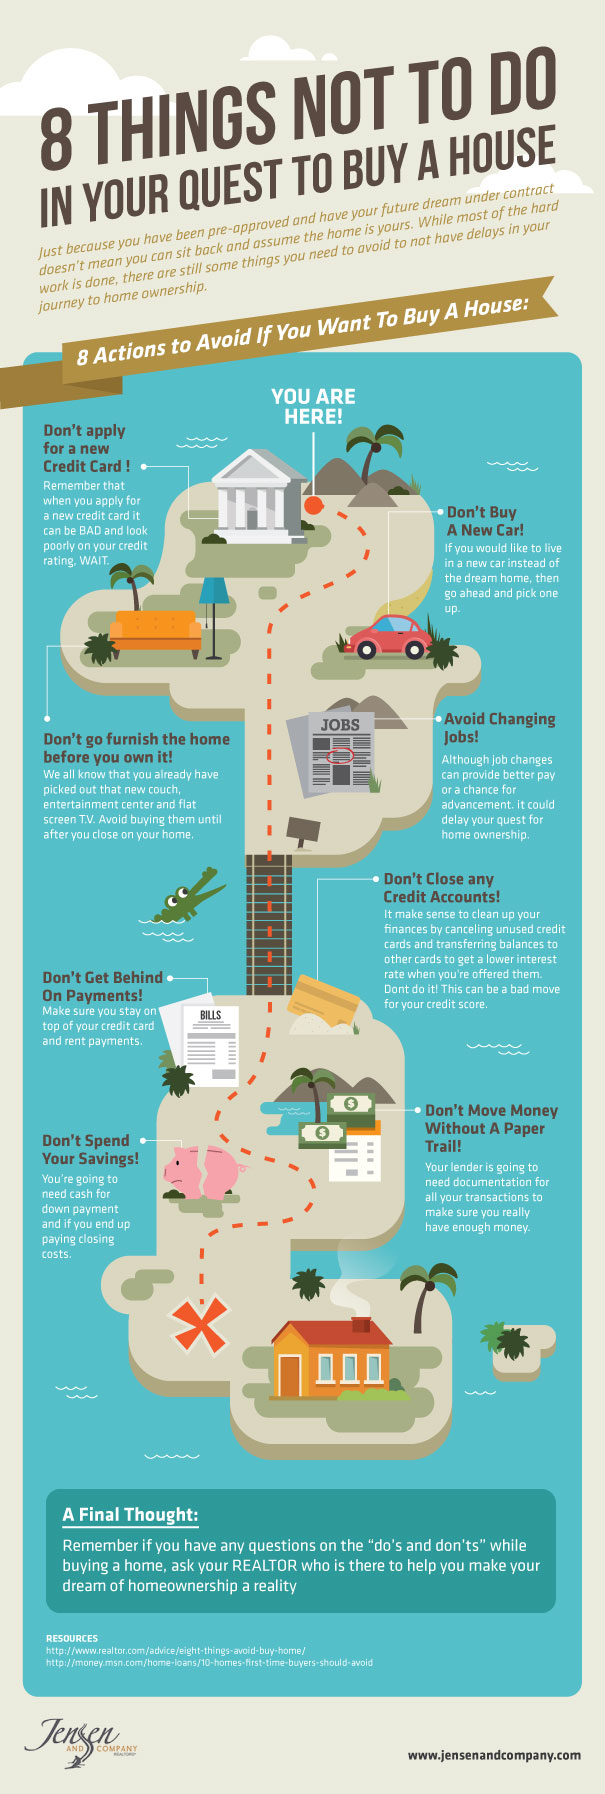 8 Things Not To Do In Your Quest To Buy A House